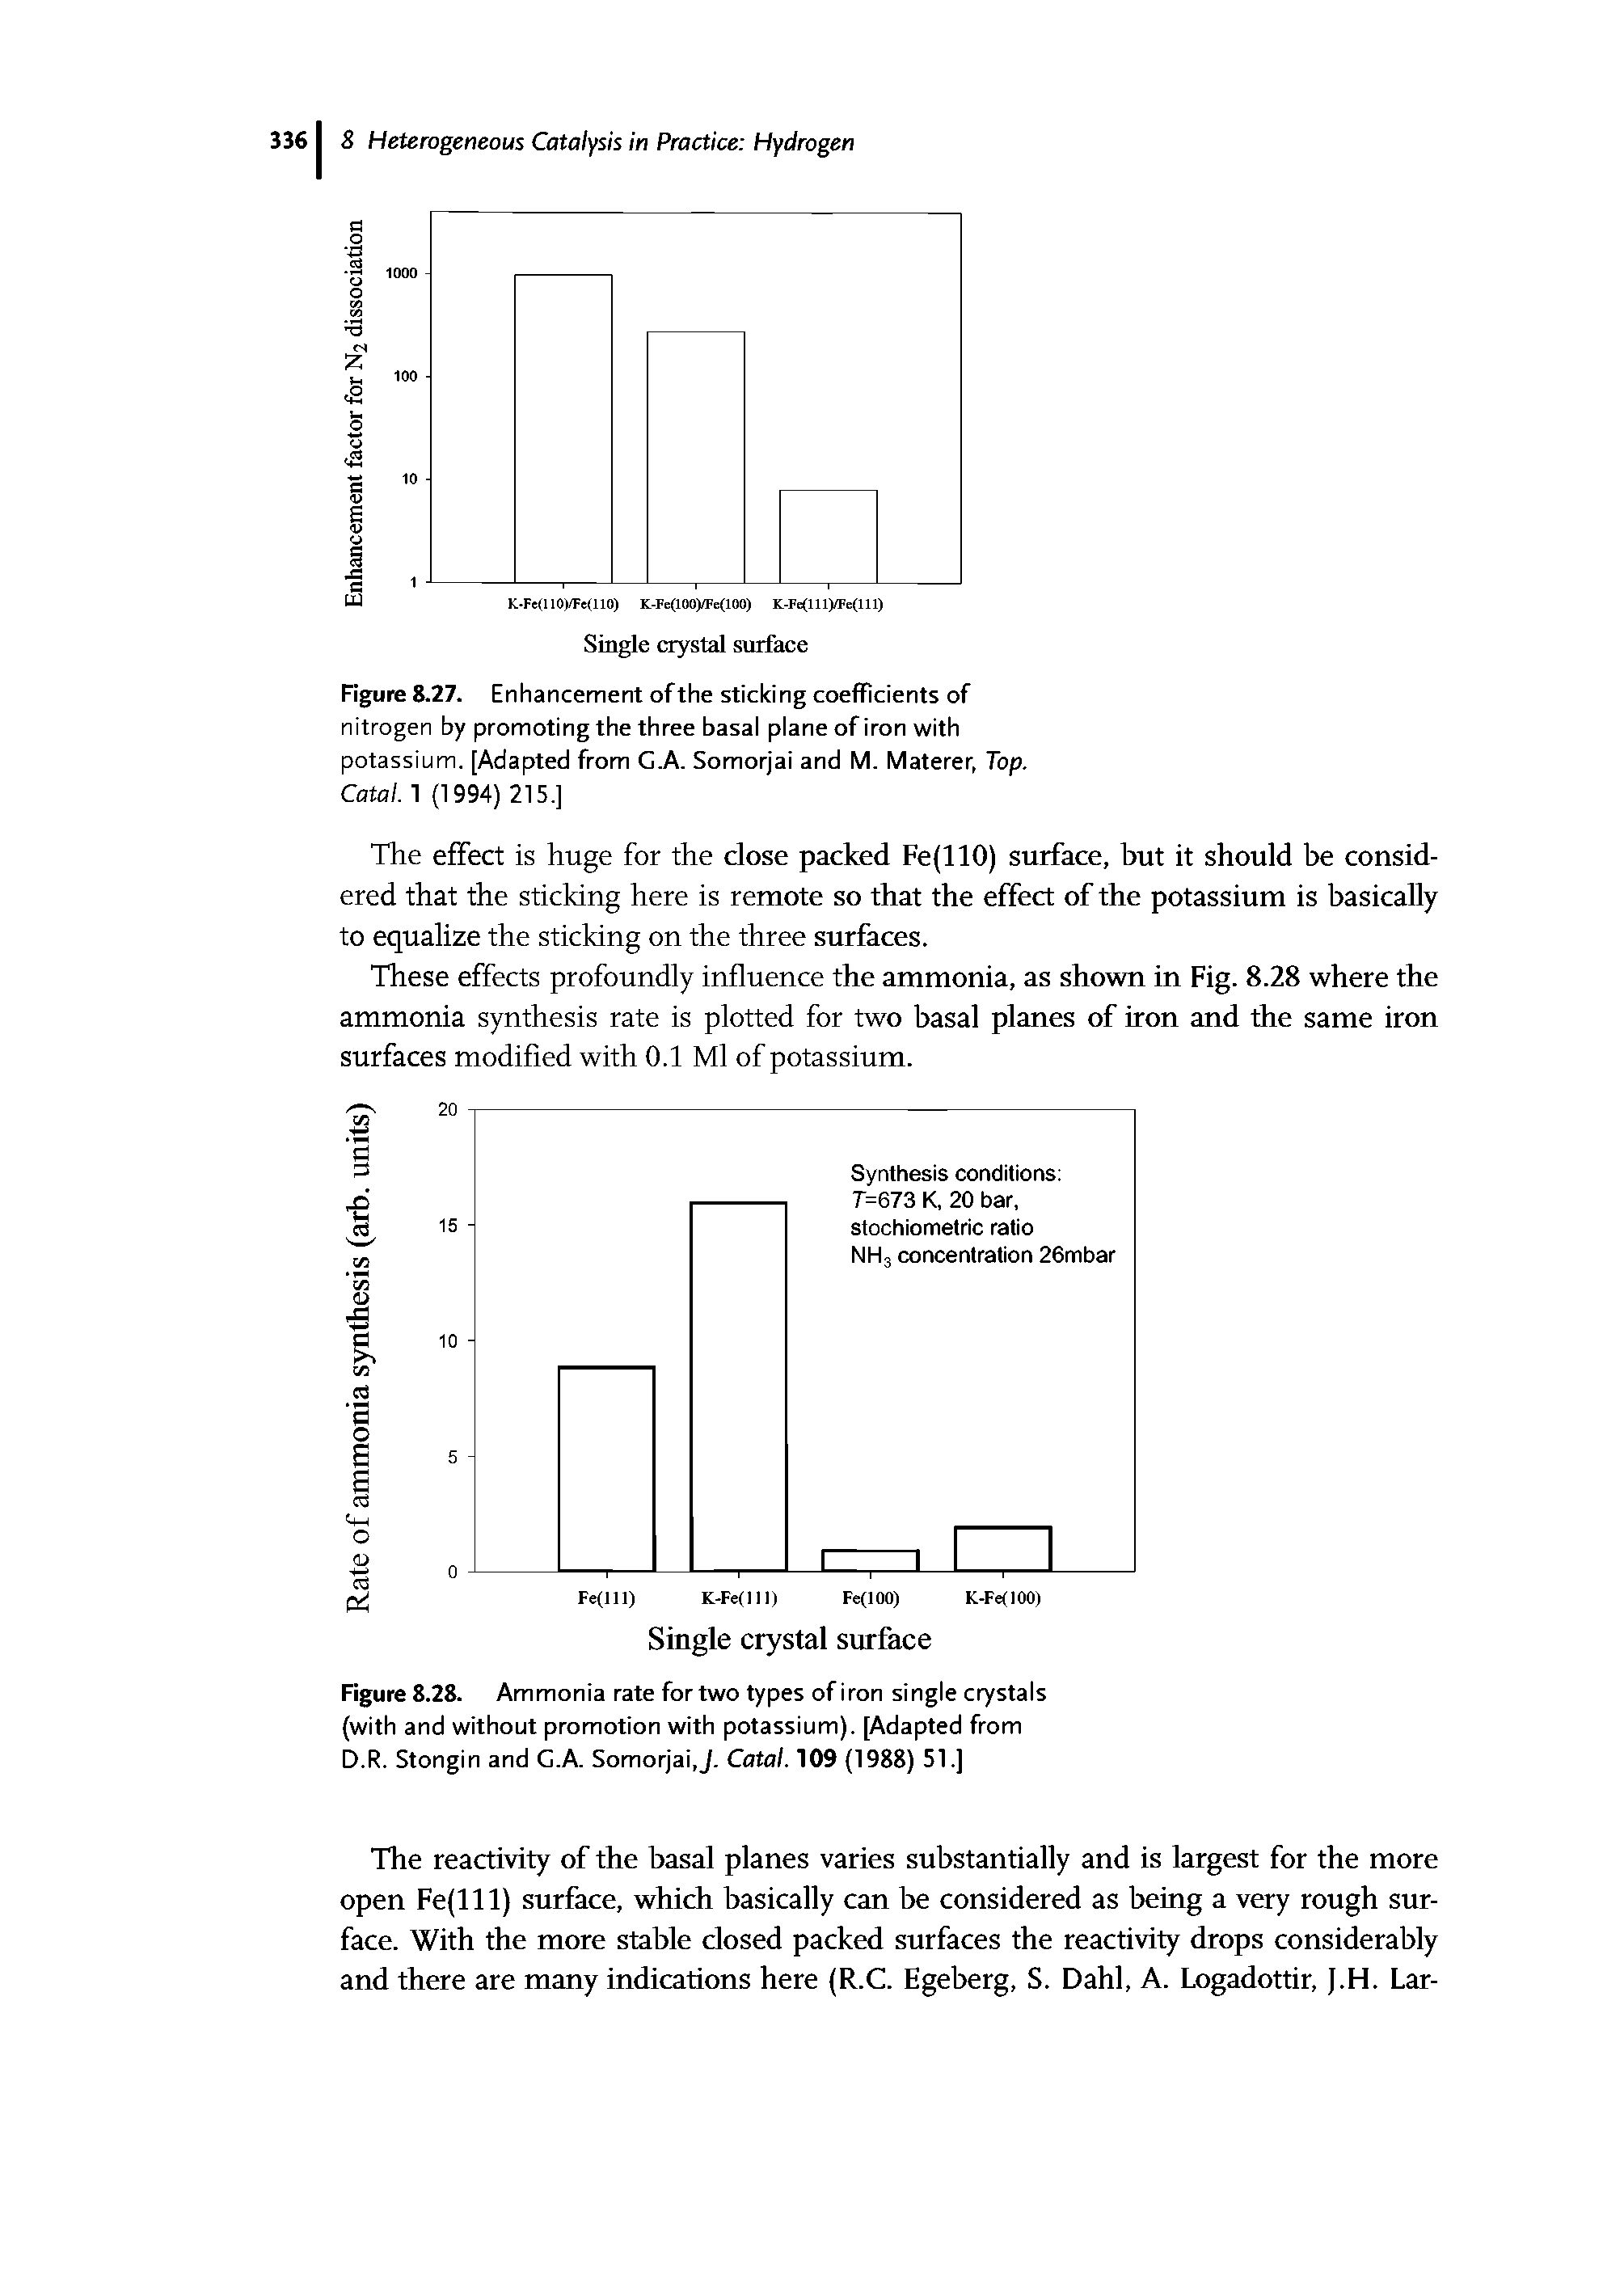 Figure 8.28. Ammonia rate for two types of iron single crystals (with and without promotion with potassium). [Adapted from D.R. Stongin and G.A. Somorjai,J. Catal. 109 (1988) 51.]...